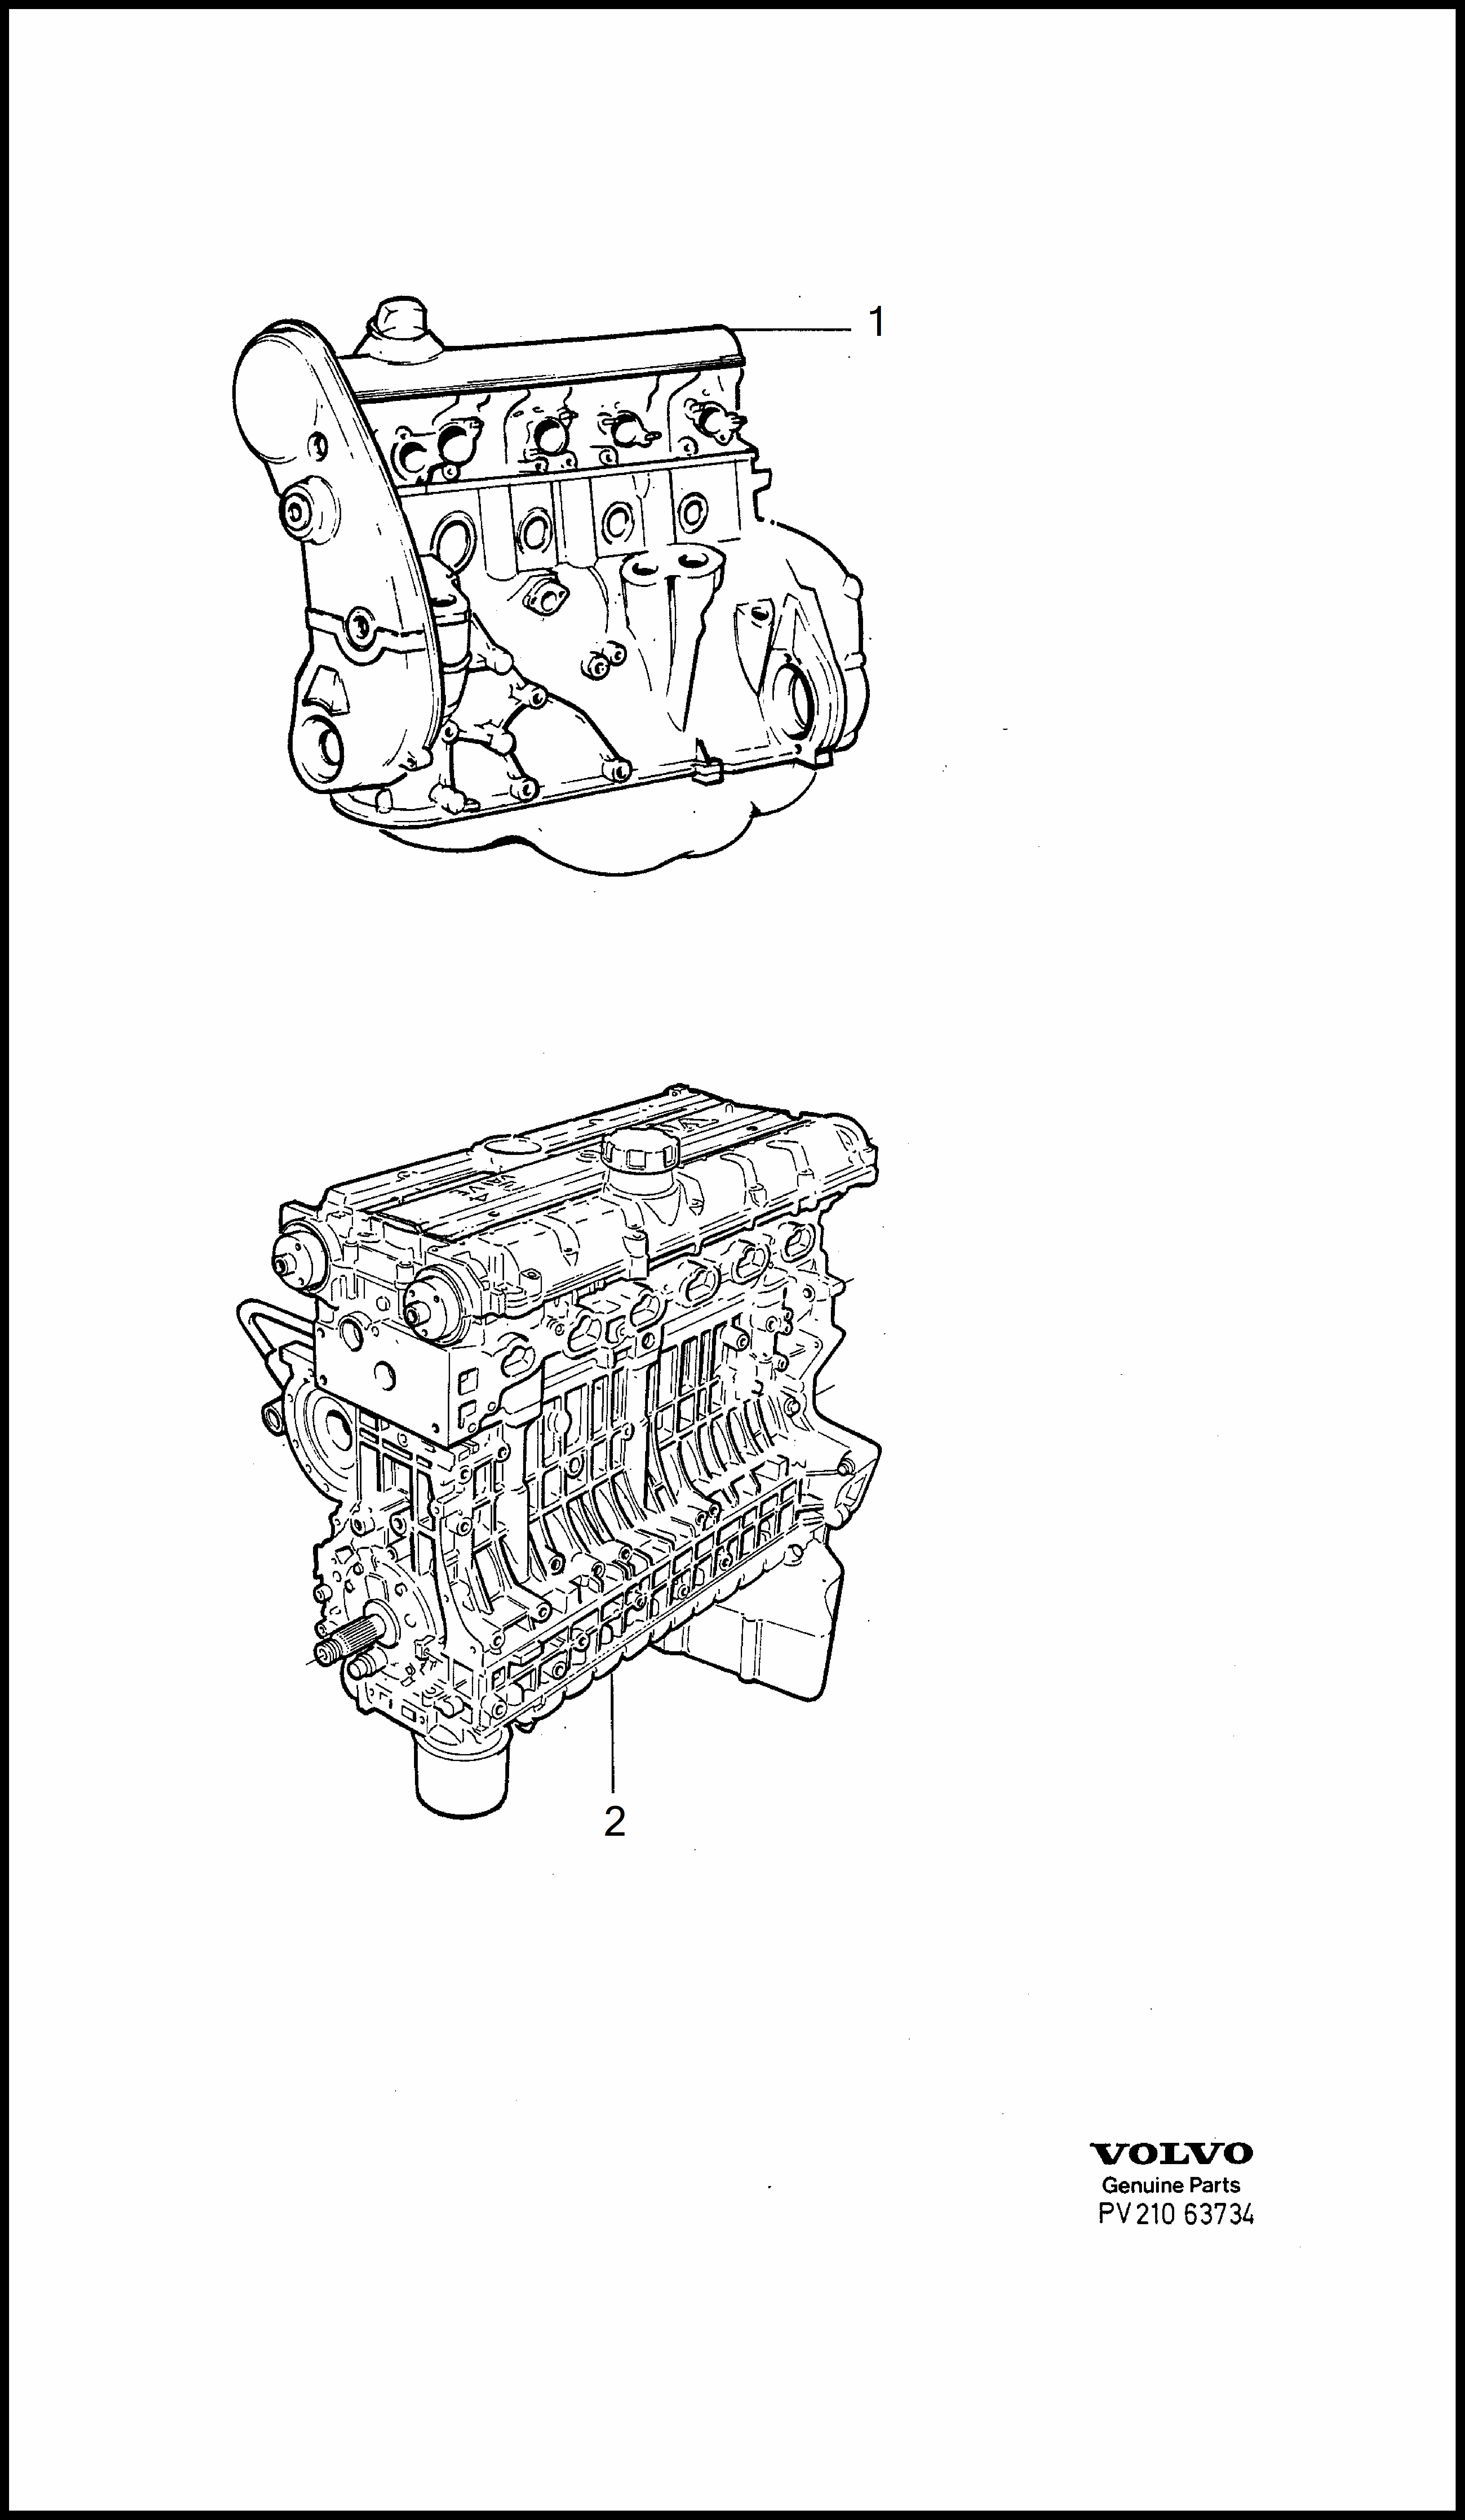 engines replacement engines dla Volvo 960 960